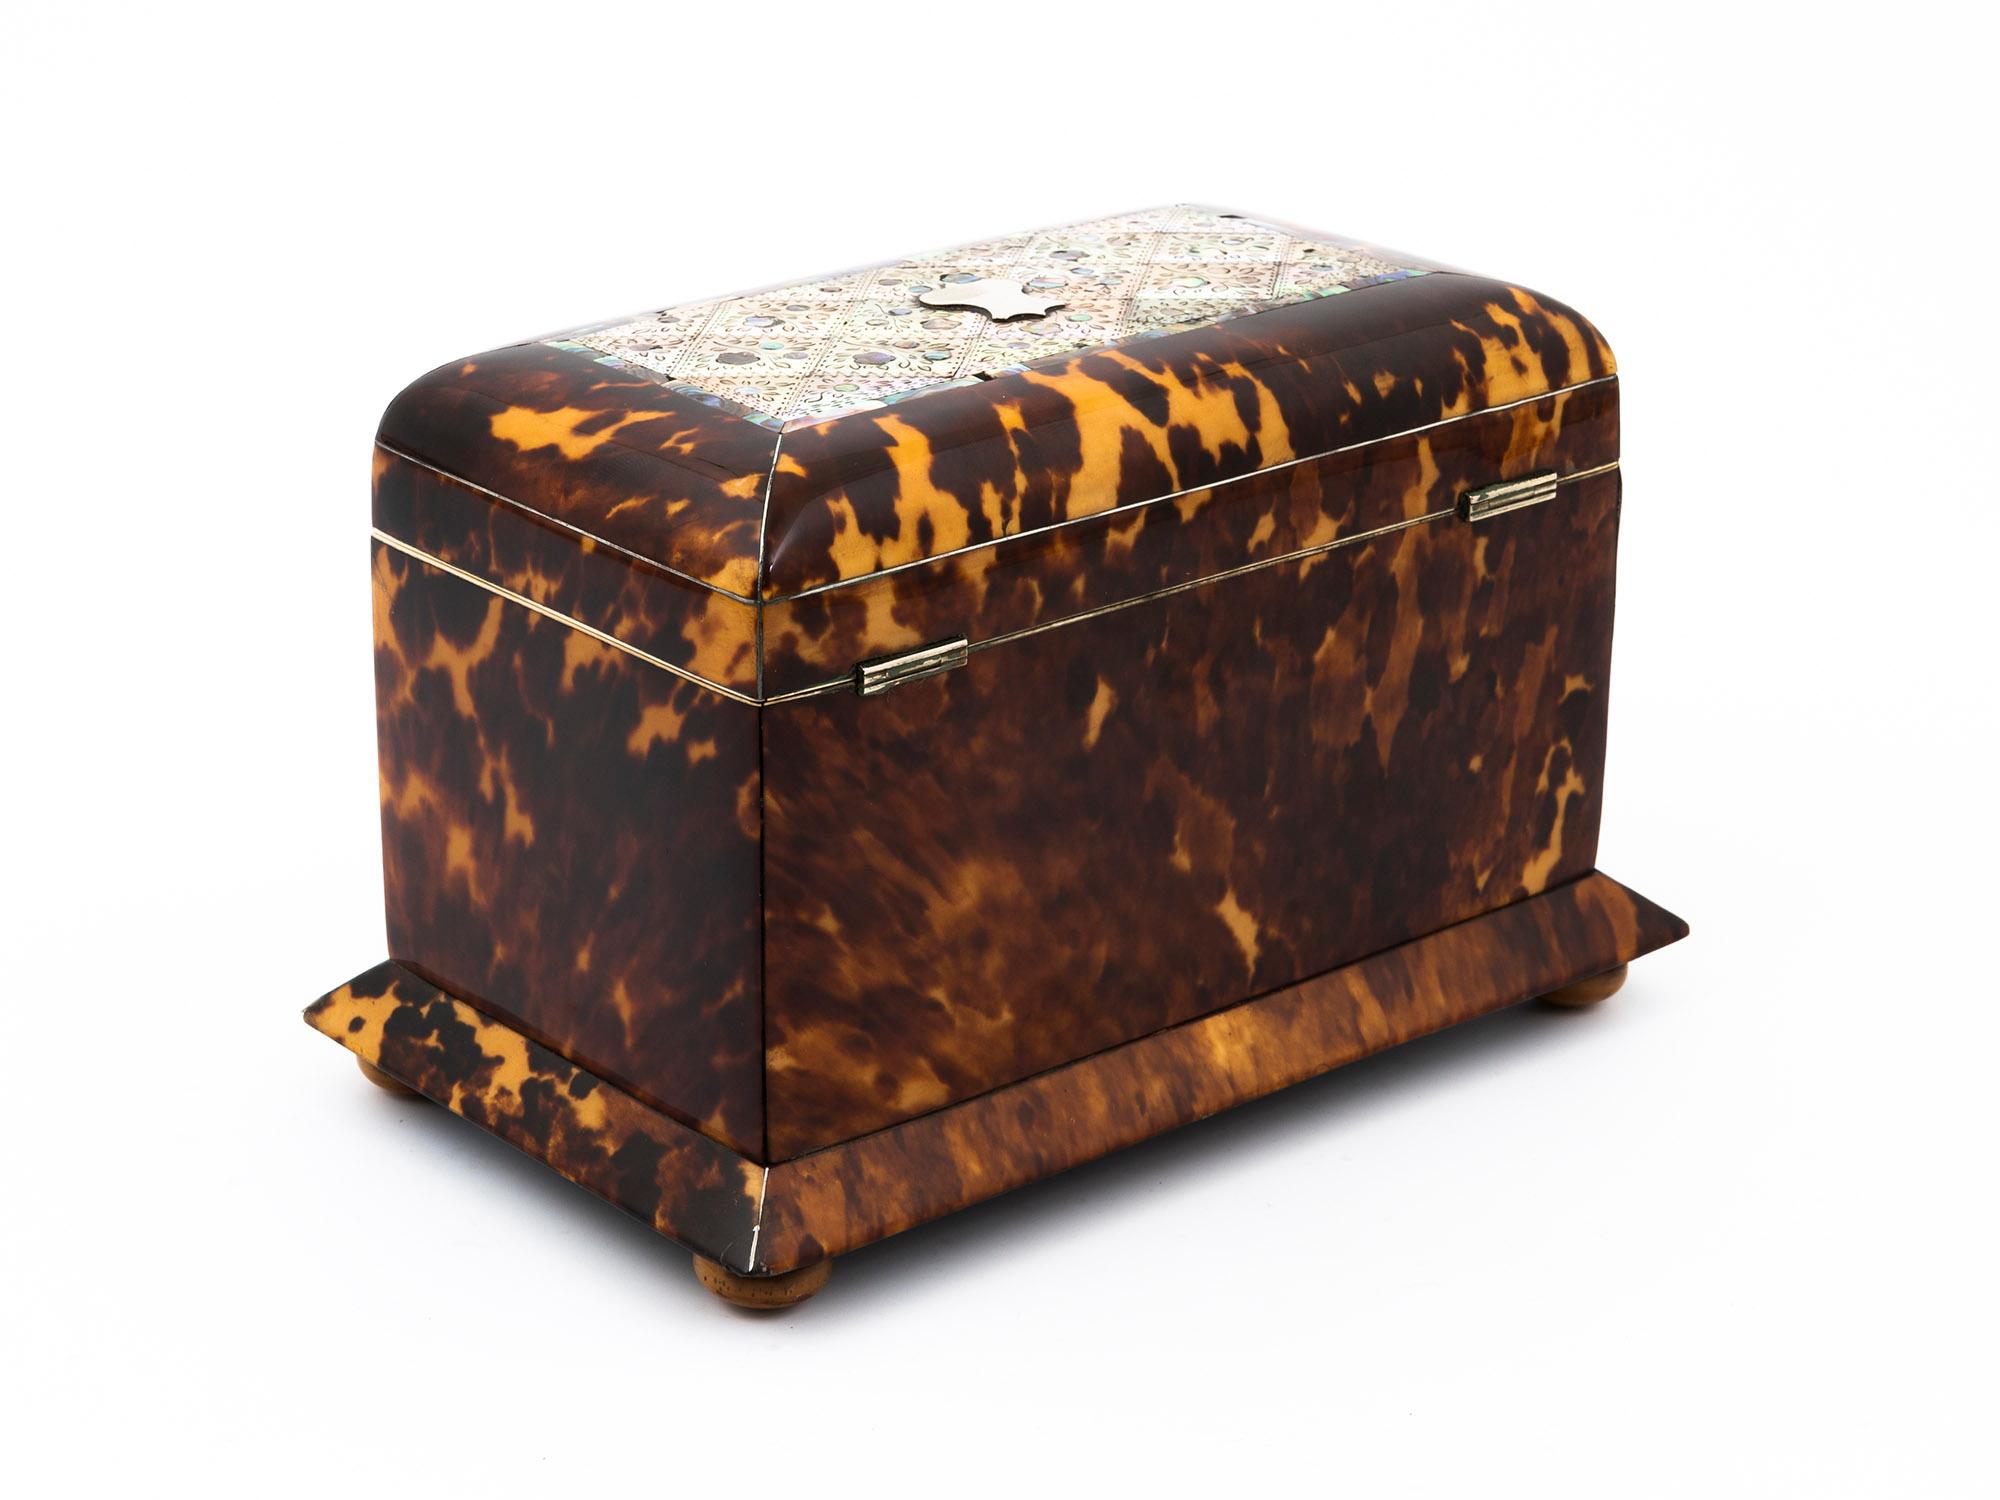 Hand-Carved Regency Tortoiseshell and Mother of Pearl Serpentine Tea Caddy For Sale